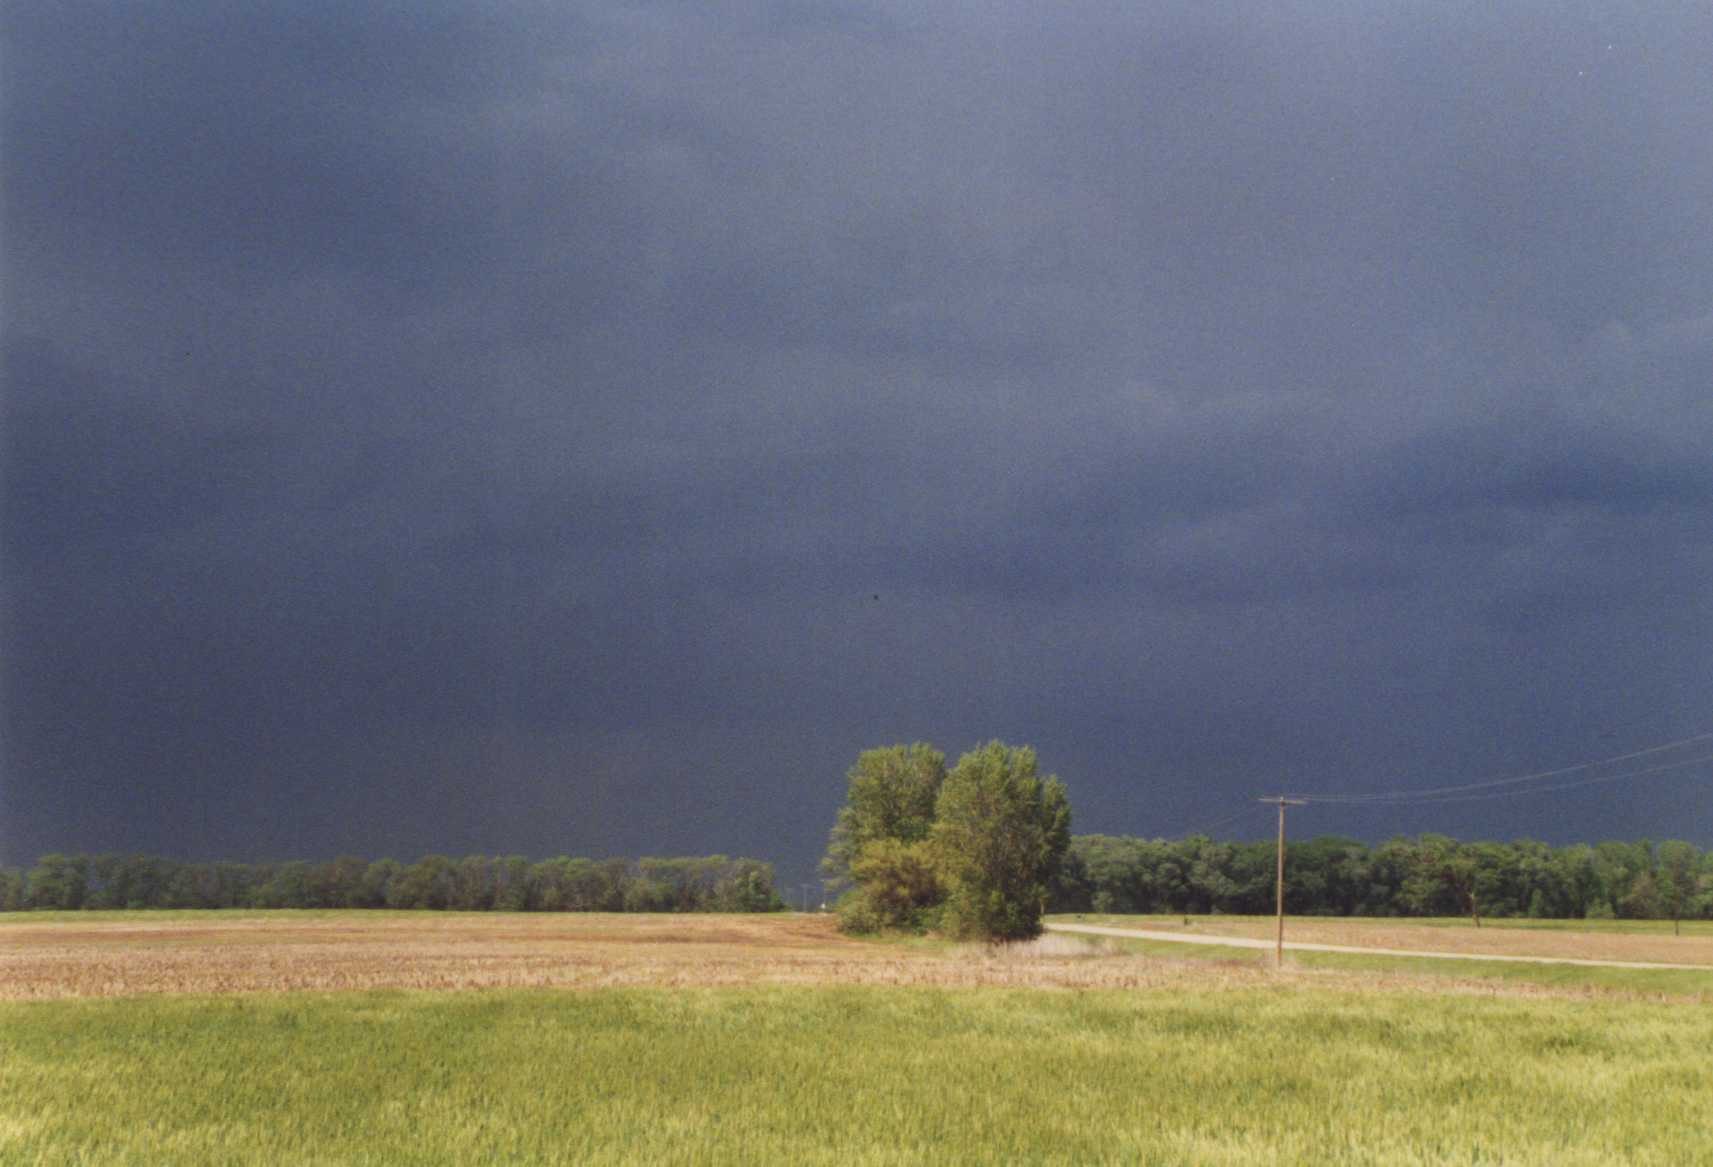 Storm Chasing 2002